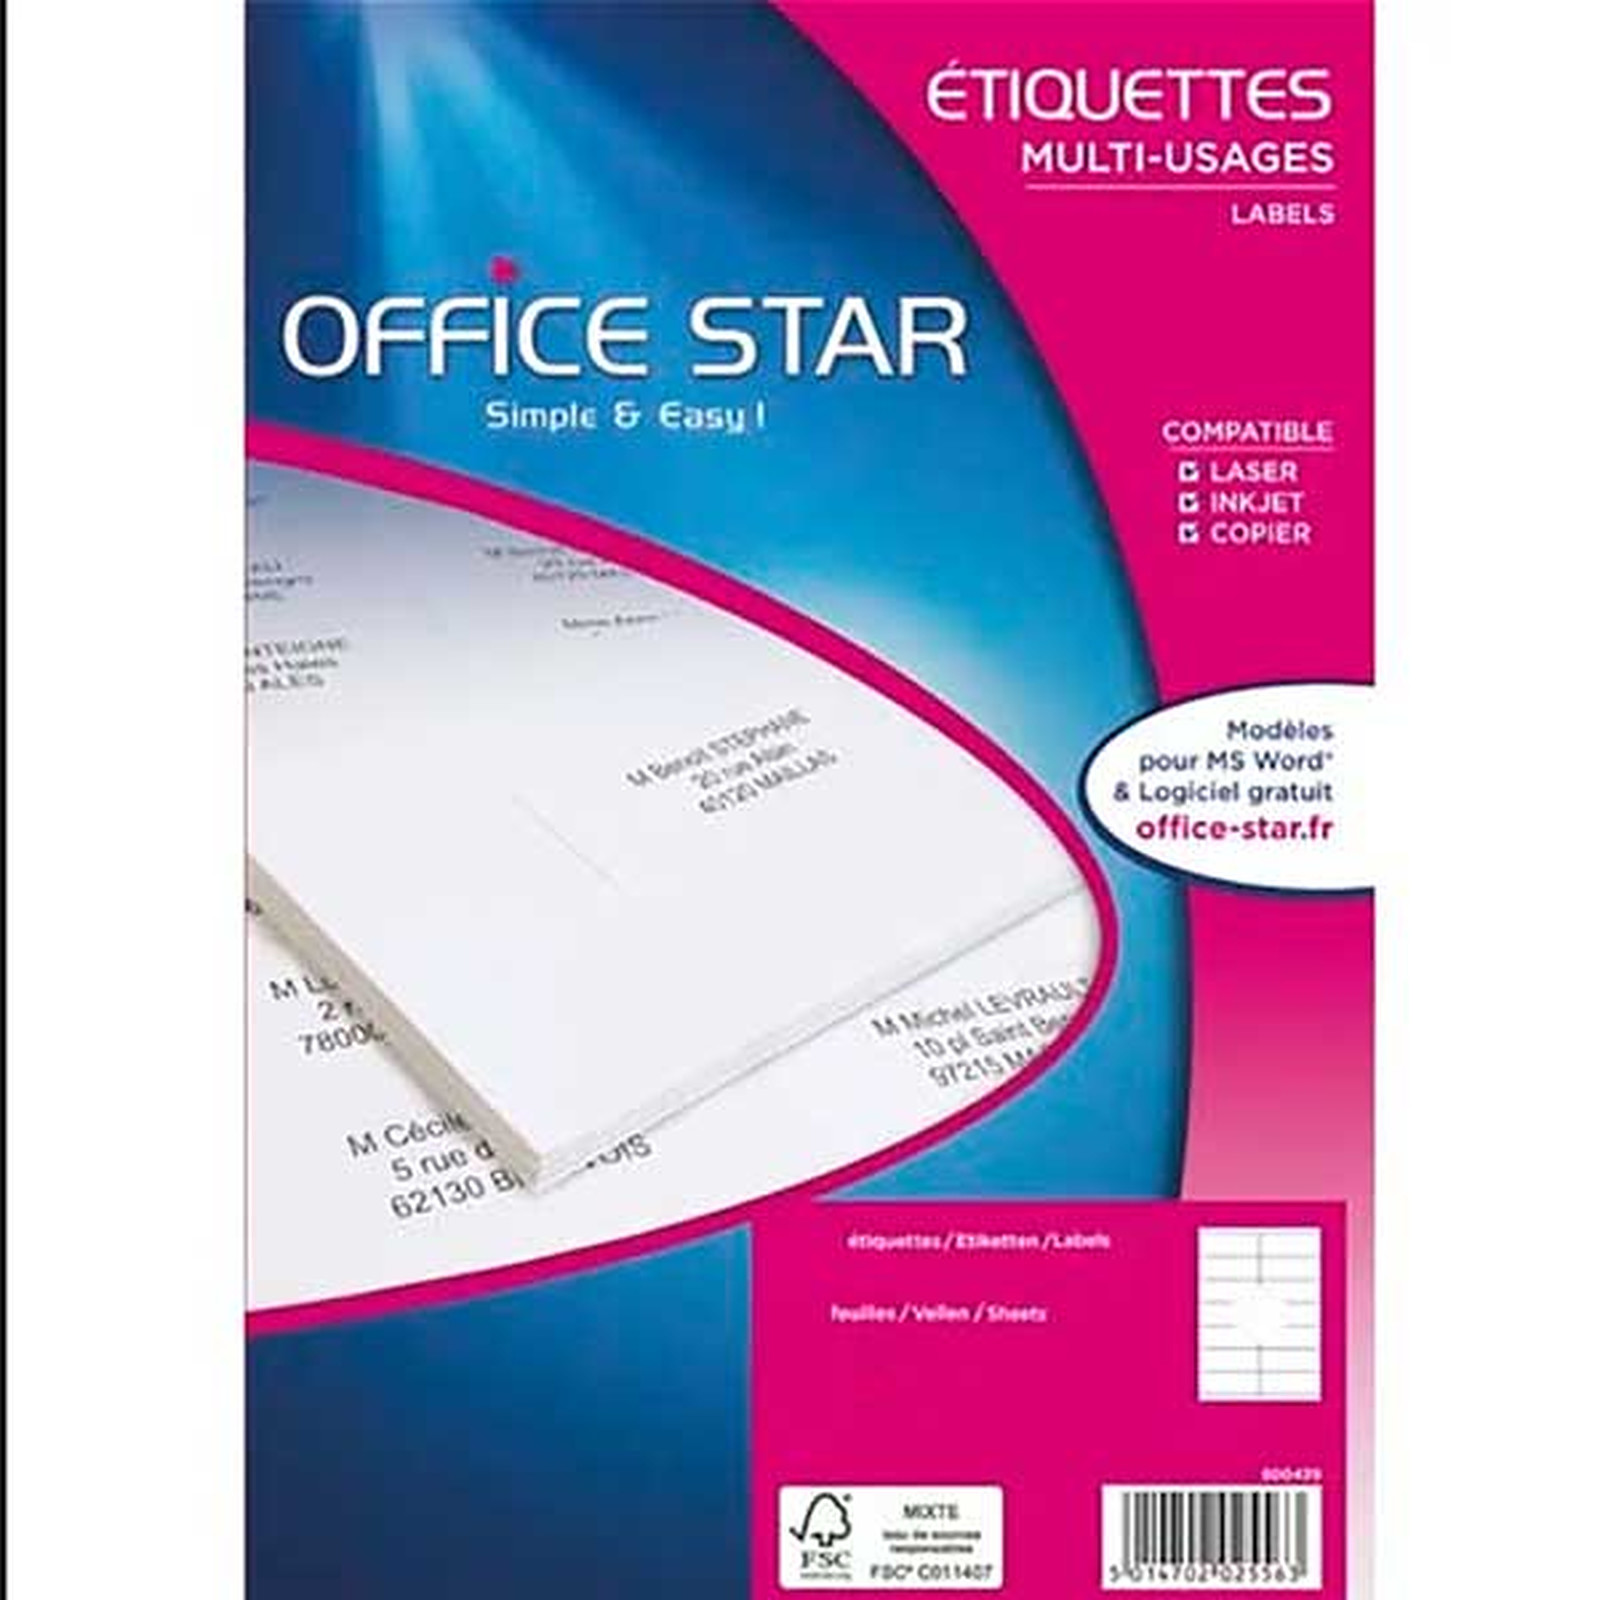 Office Star Etiquettes multi-usage blanches 105 x 74 mm x 800 - Etiquette Office Star